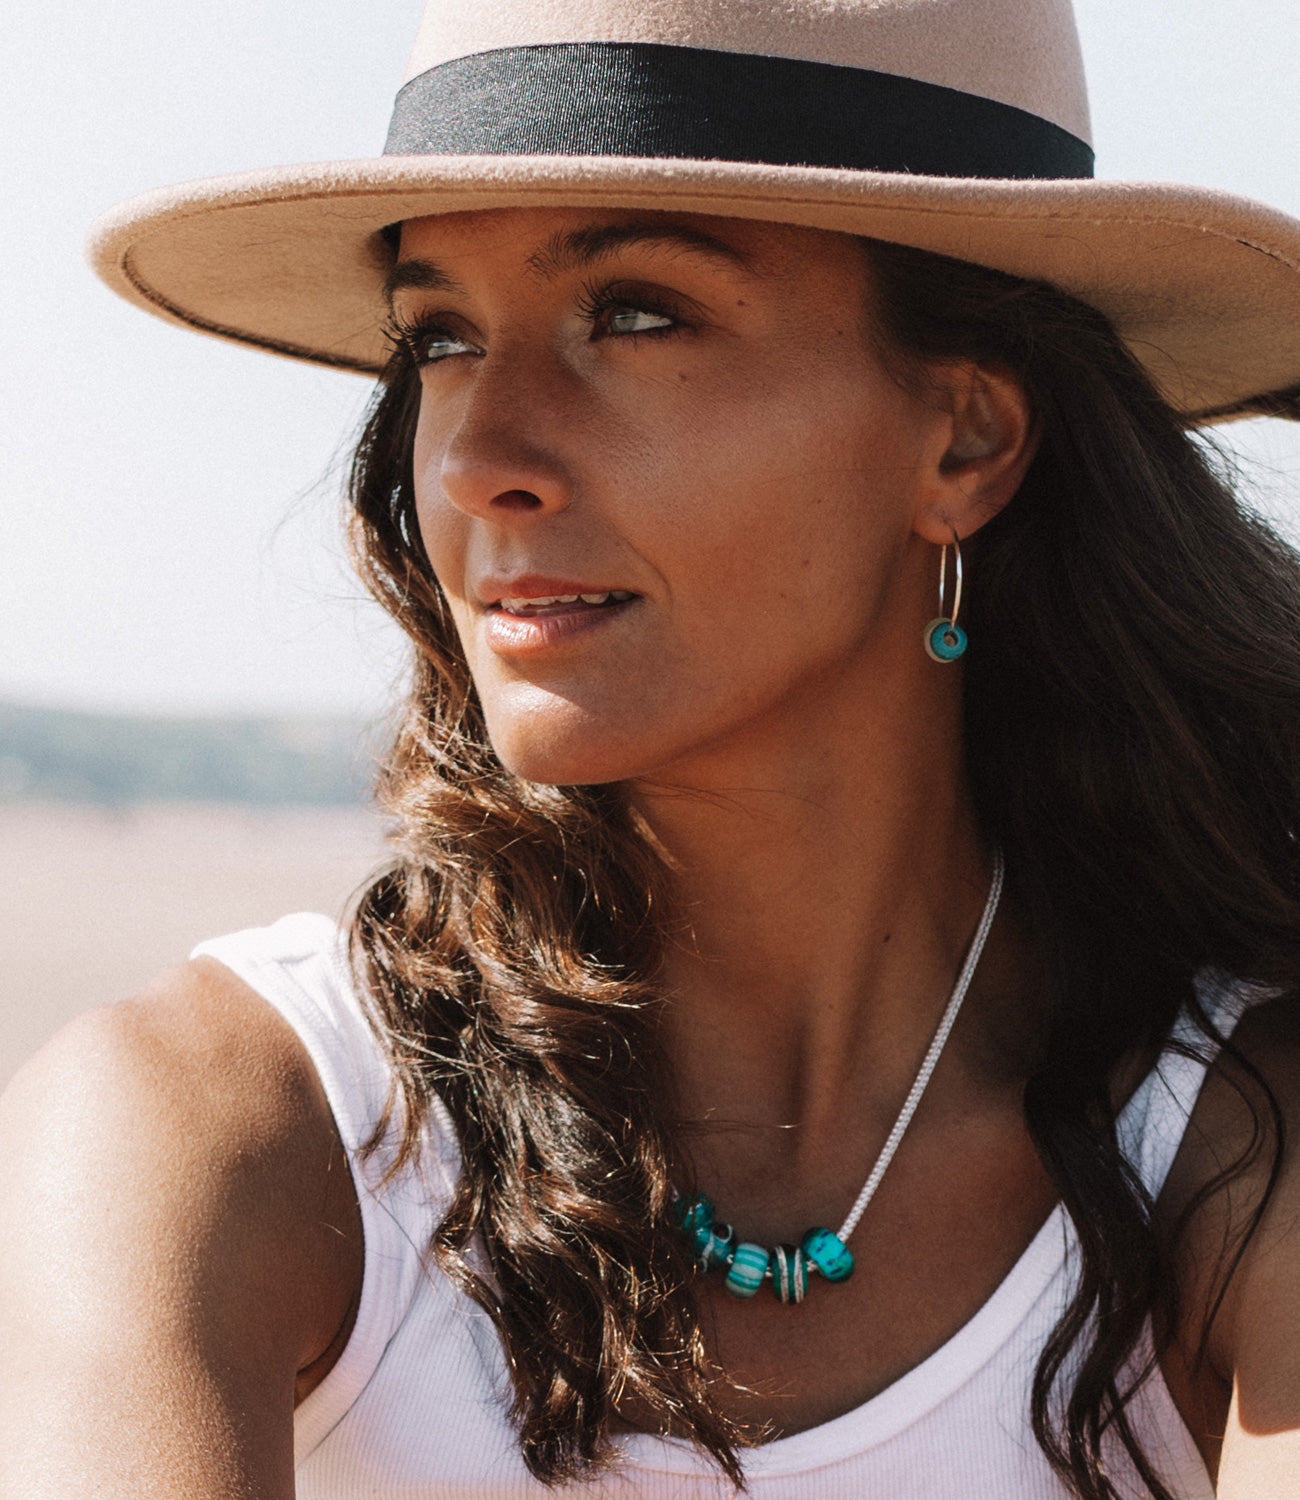 Girl on beach wearing hat and sterling silver necklace with green beads and earrings on the beach.